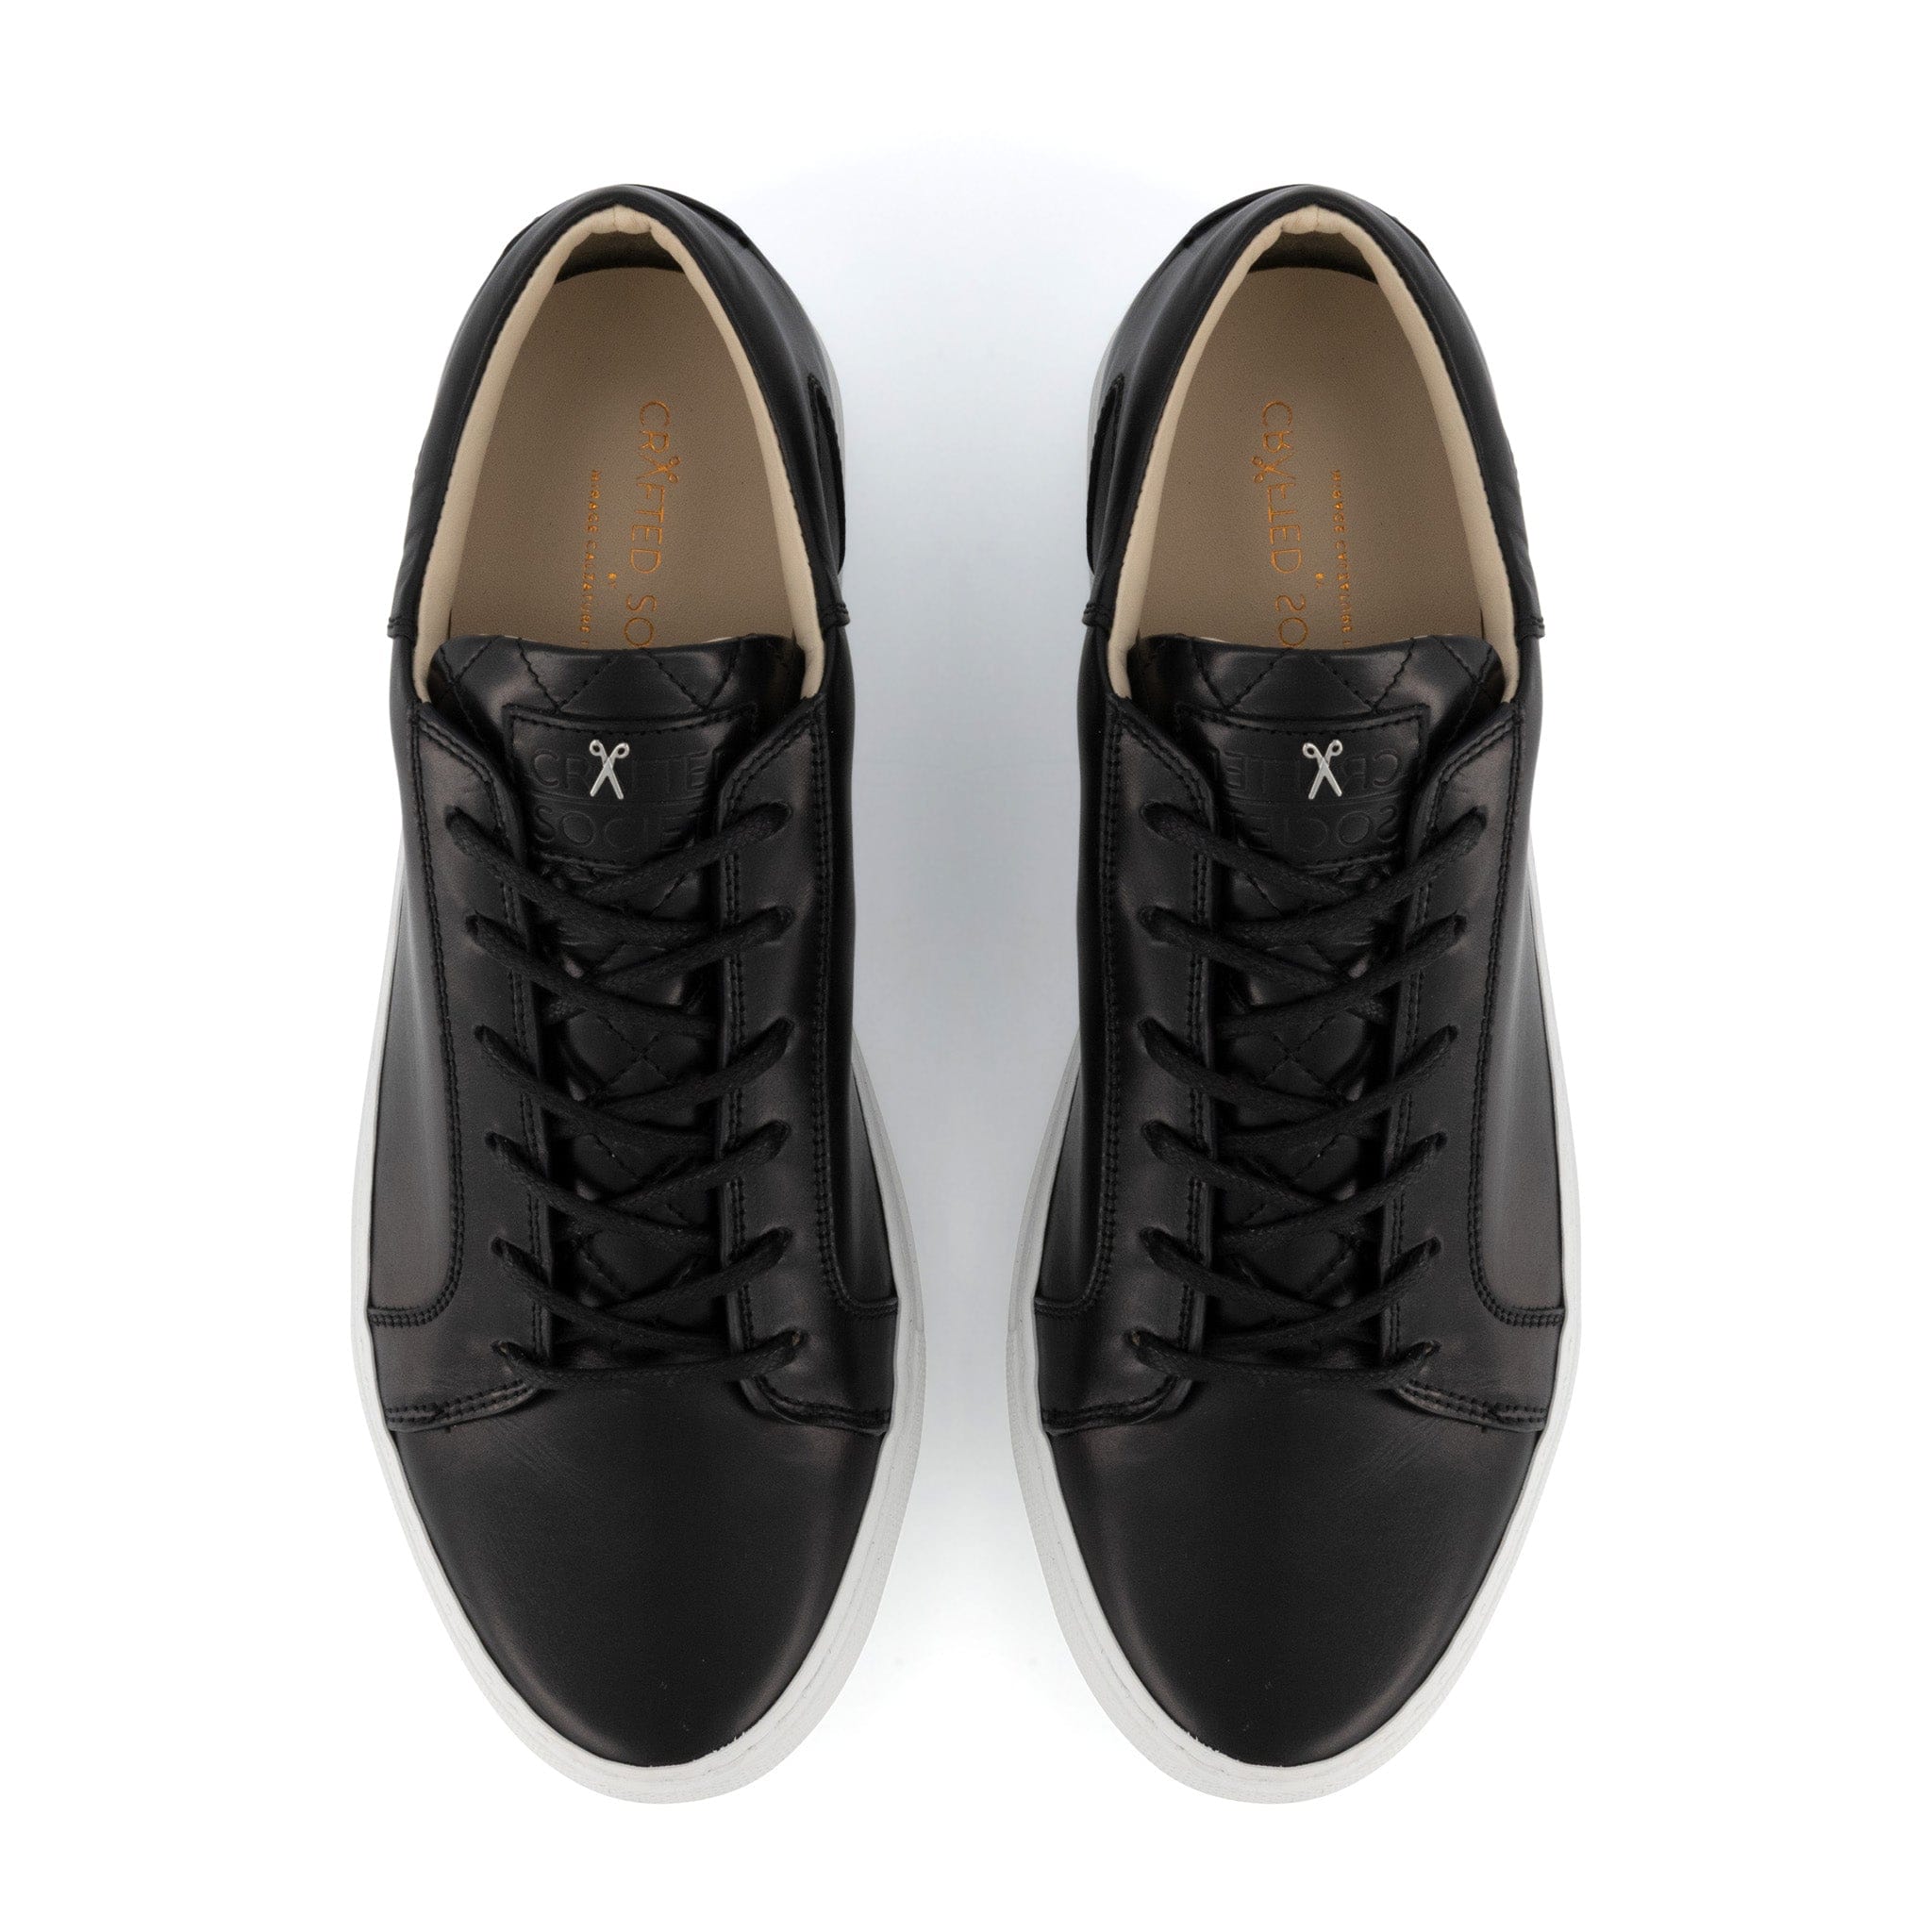 Mario Low Refined Sneaker | Black Full Grain Leather | White Outsole | Made in Italy | Sizes 39, 40, 41, 42 & 43